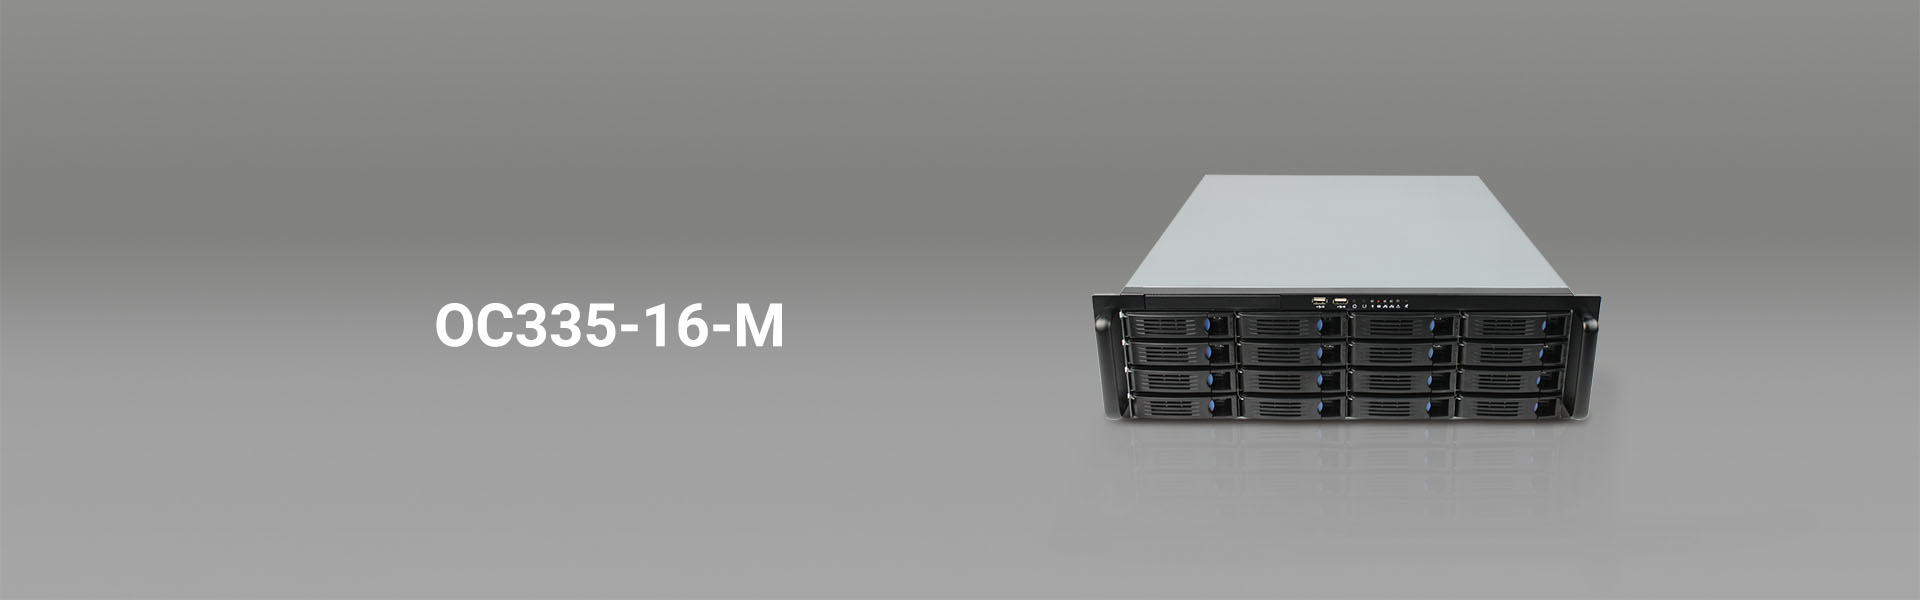 SERVER chassis-OC335-16-M onechassis-banner